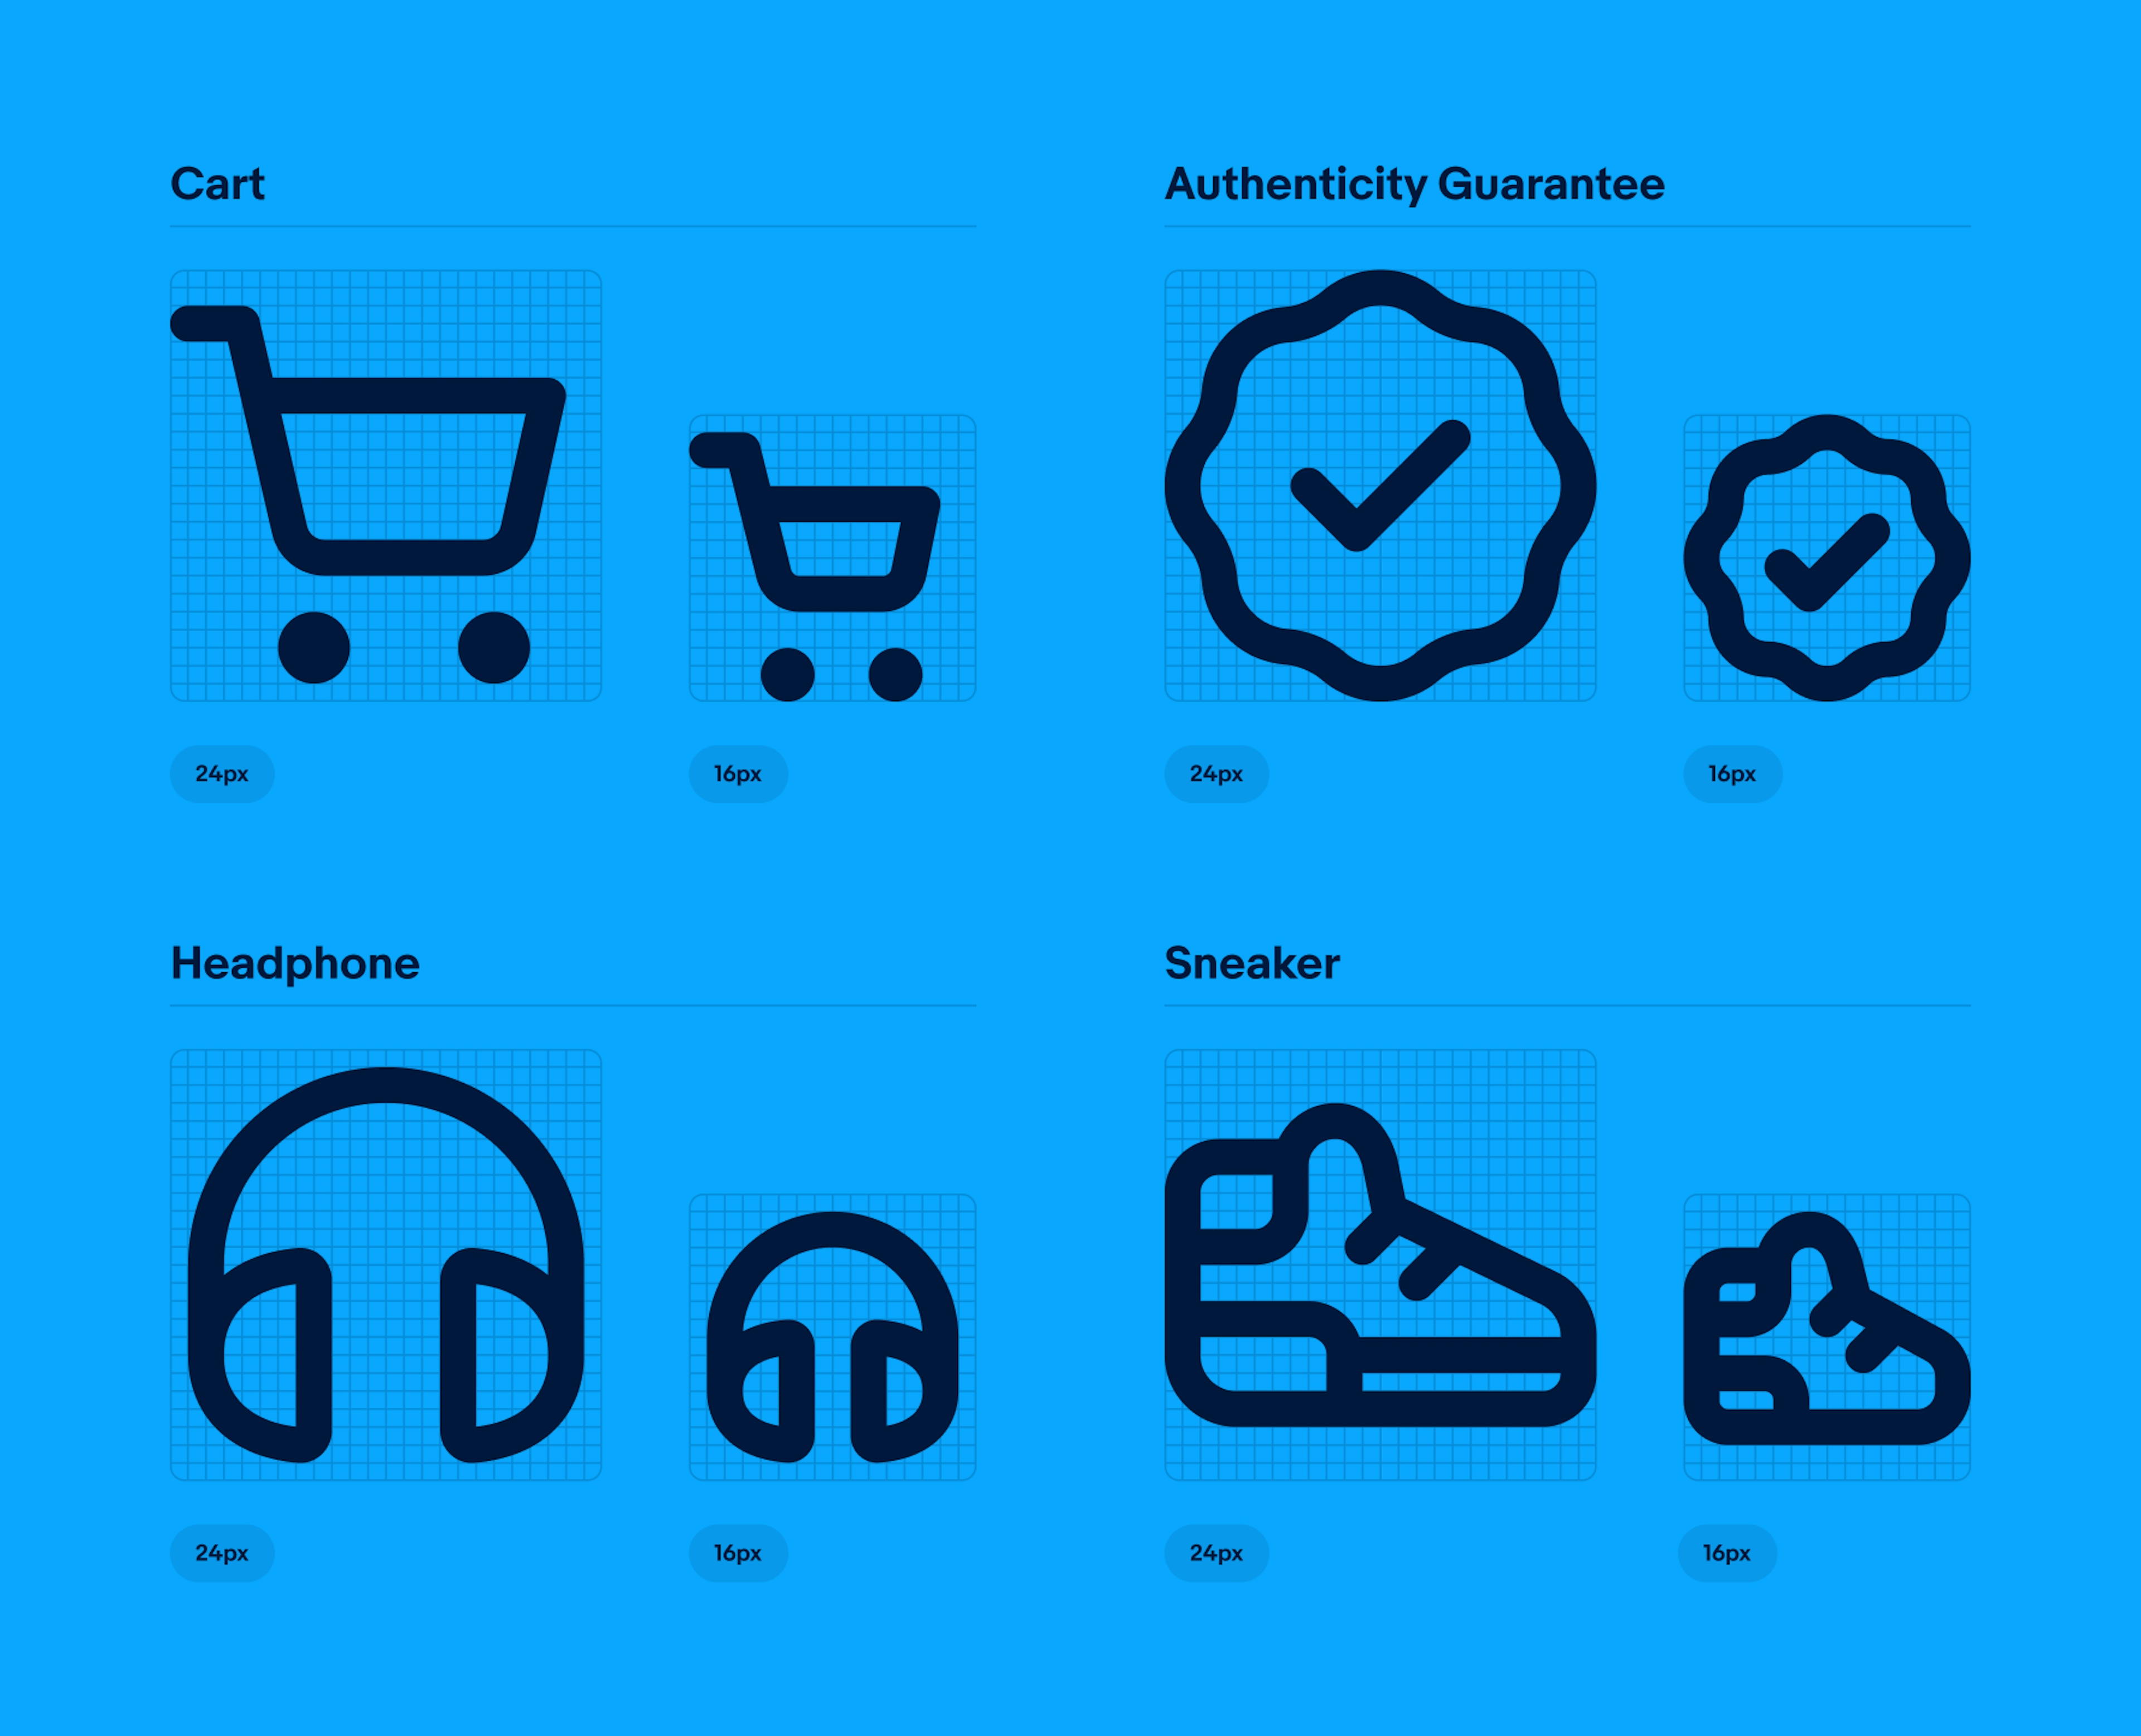 Four quadrants of large illustrative icon pairs with grid lines on a vibrant blue background. Upper left is cart 24 and 16px. Upper right is authenticity guarantee 24 and 16px. Lower left is headphone 24 and 16px. Lower right is sneaker 24 and 16px.